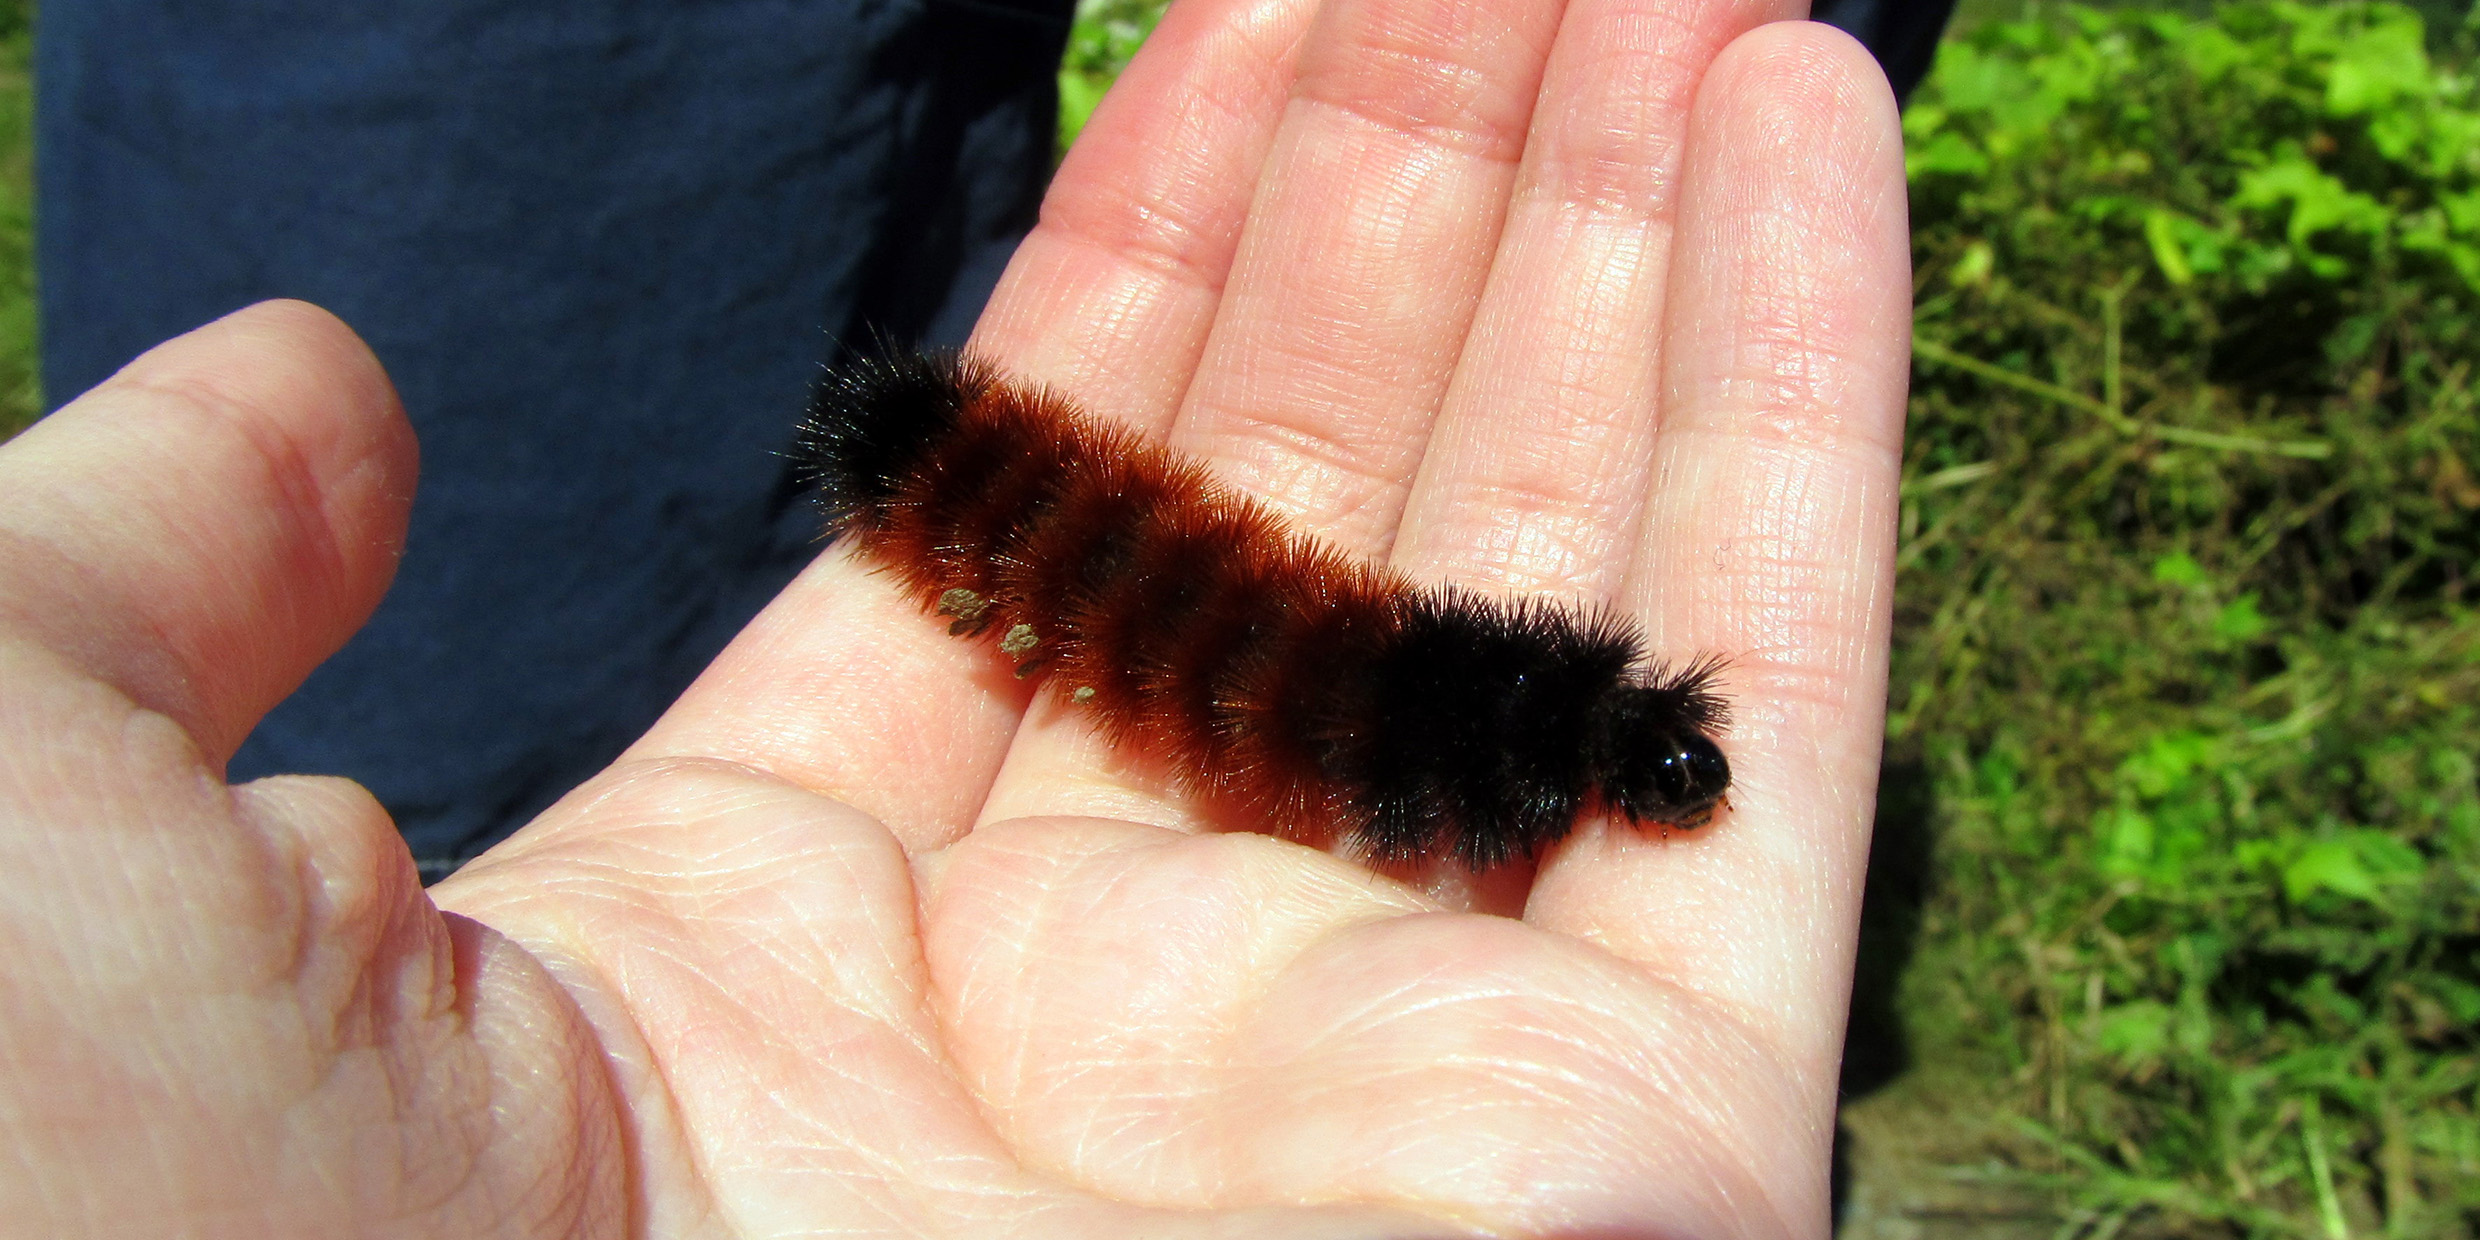 Image of a wooly bear caterpillar resting on a person's open palm